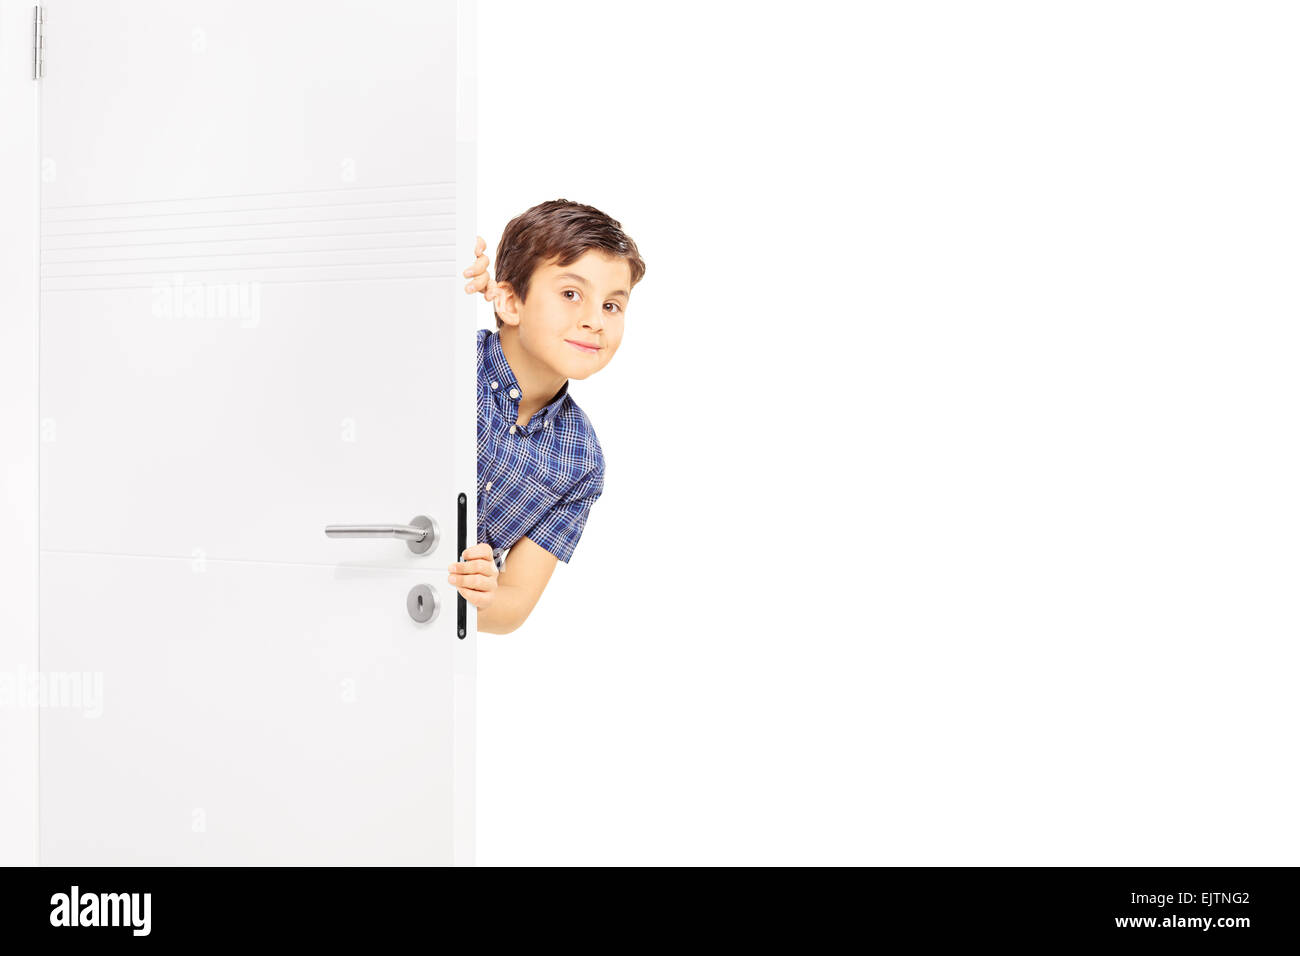 Lovely little boy sneaking a peek behind a door and looking at the camera isolated on white background Stock Photo